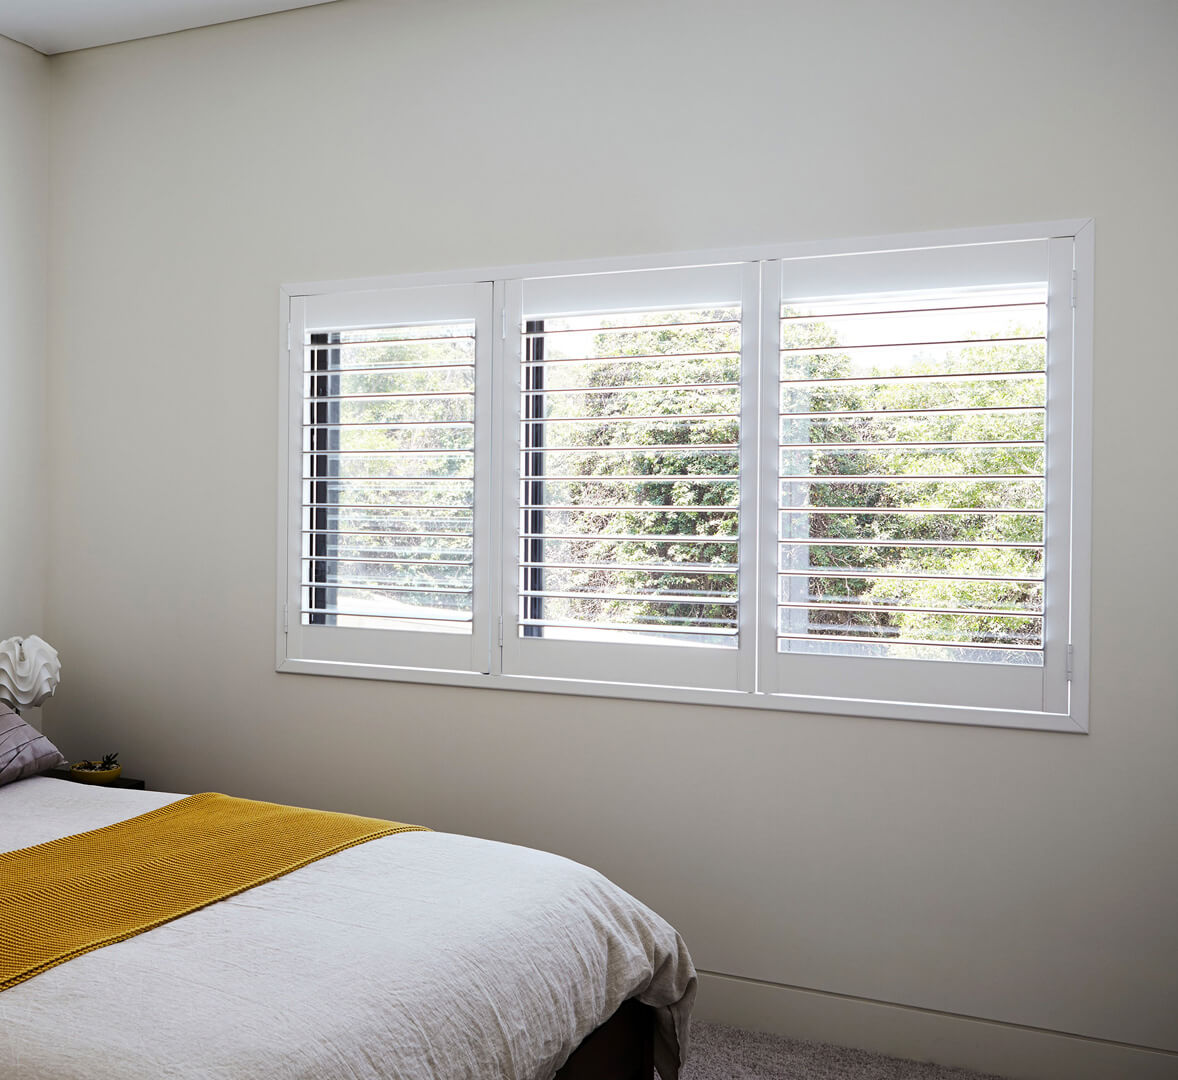 Change Your Simple Interior into an Elegant Space with Plantation Shutters